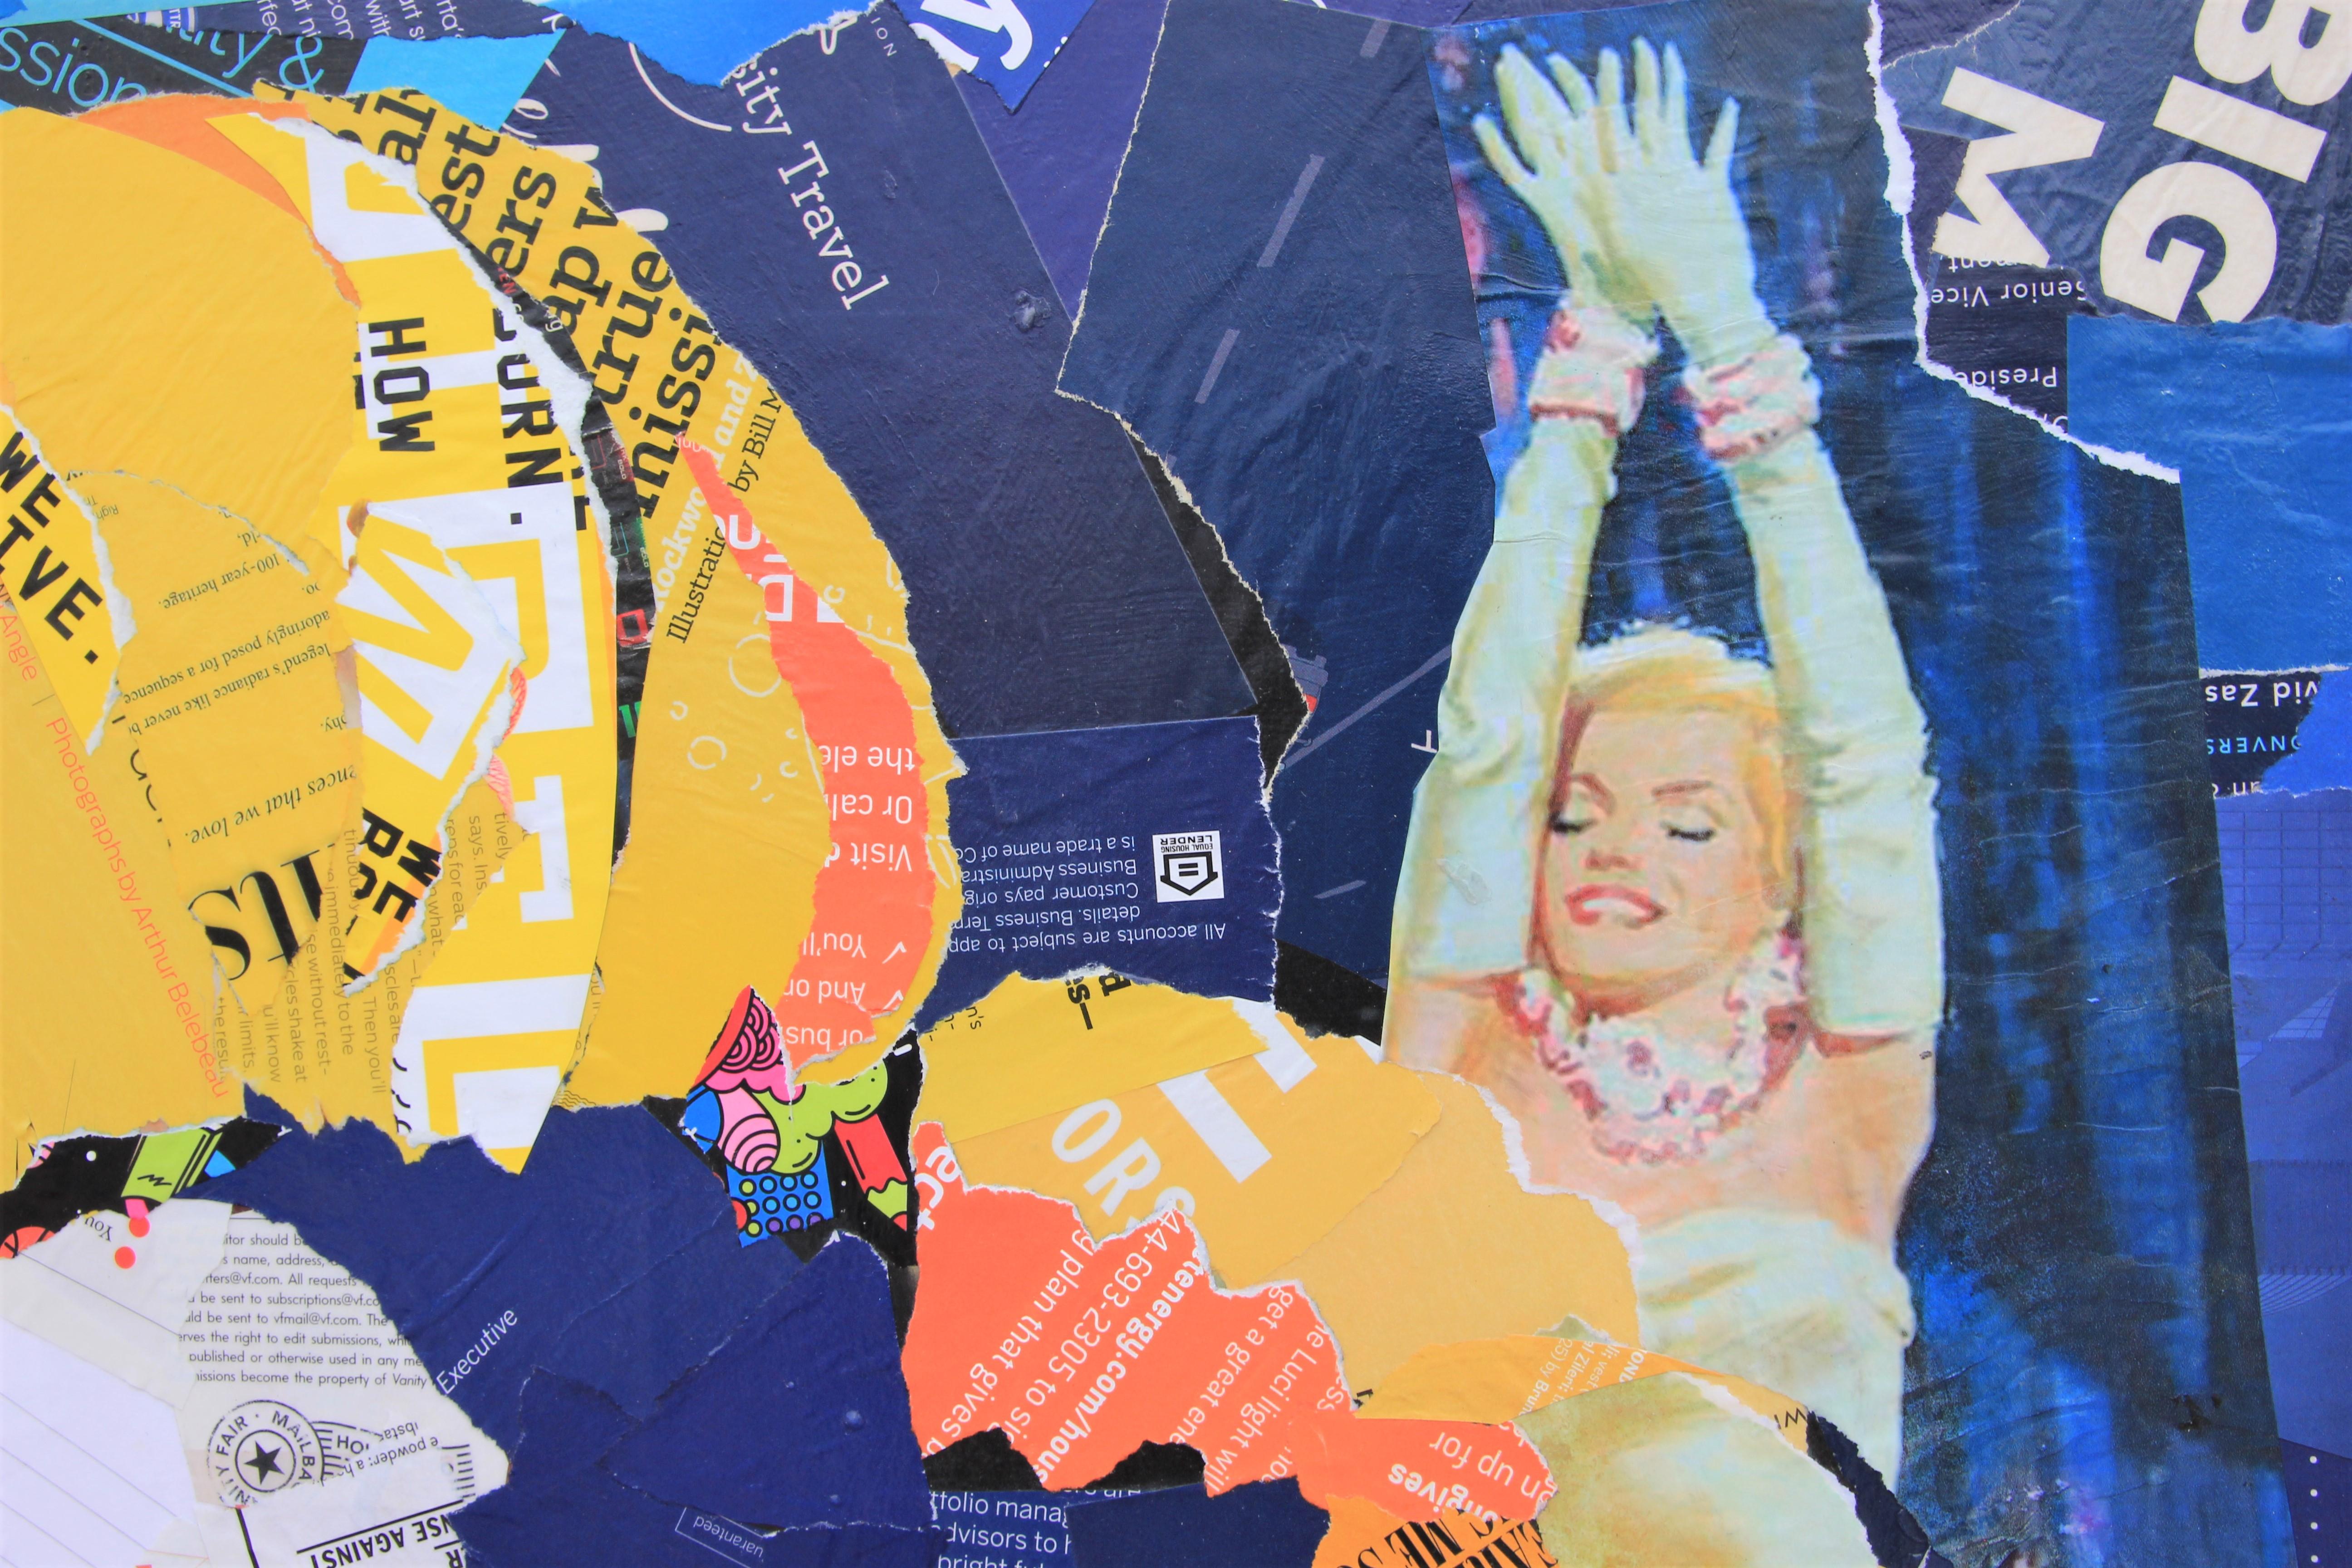 Colorful pop art mixed media collage by Houston, Texas artist Jim Hudek. Pink, yellow, and blue toned collage depicting Marilyn Monroe's face with her iconic blonde hair and red lips against a background of blue and pink magazine cutouts. Text on